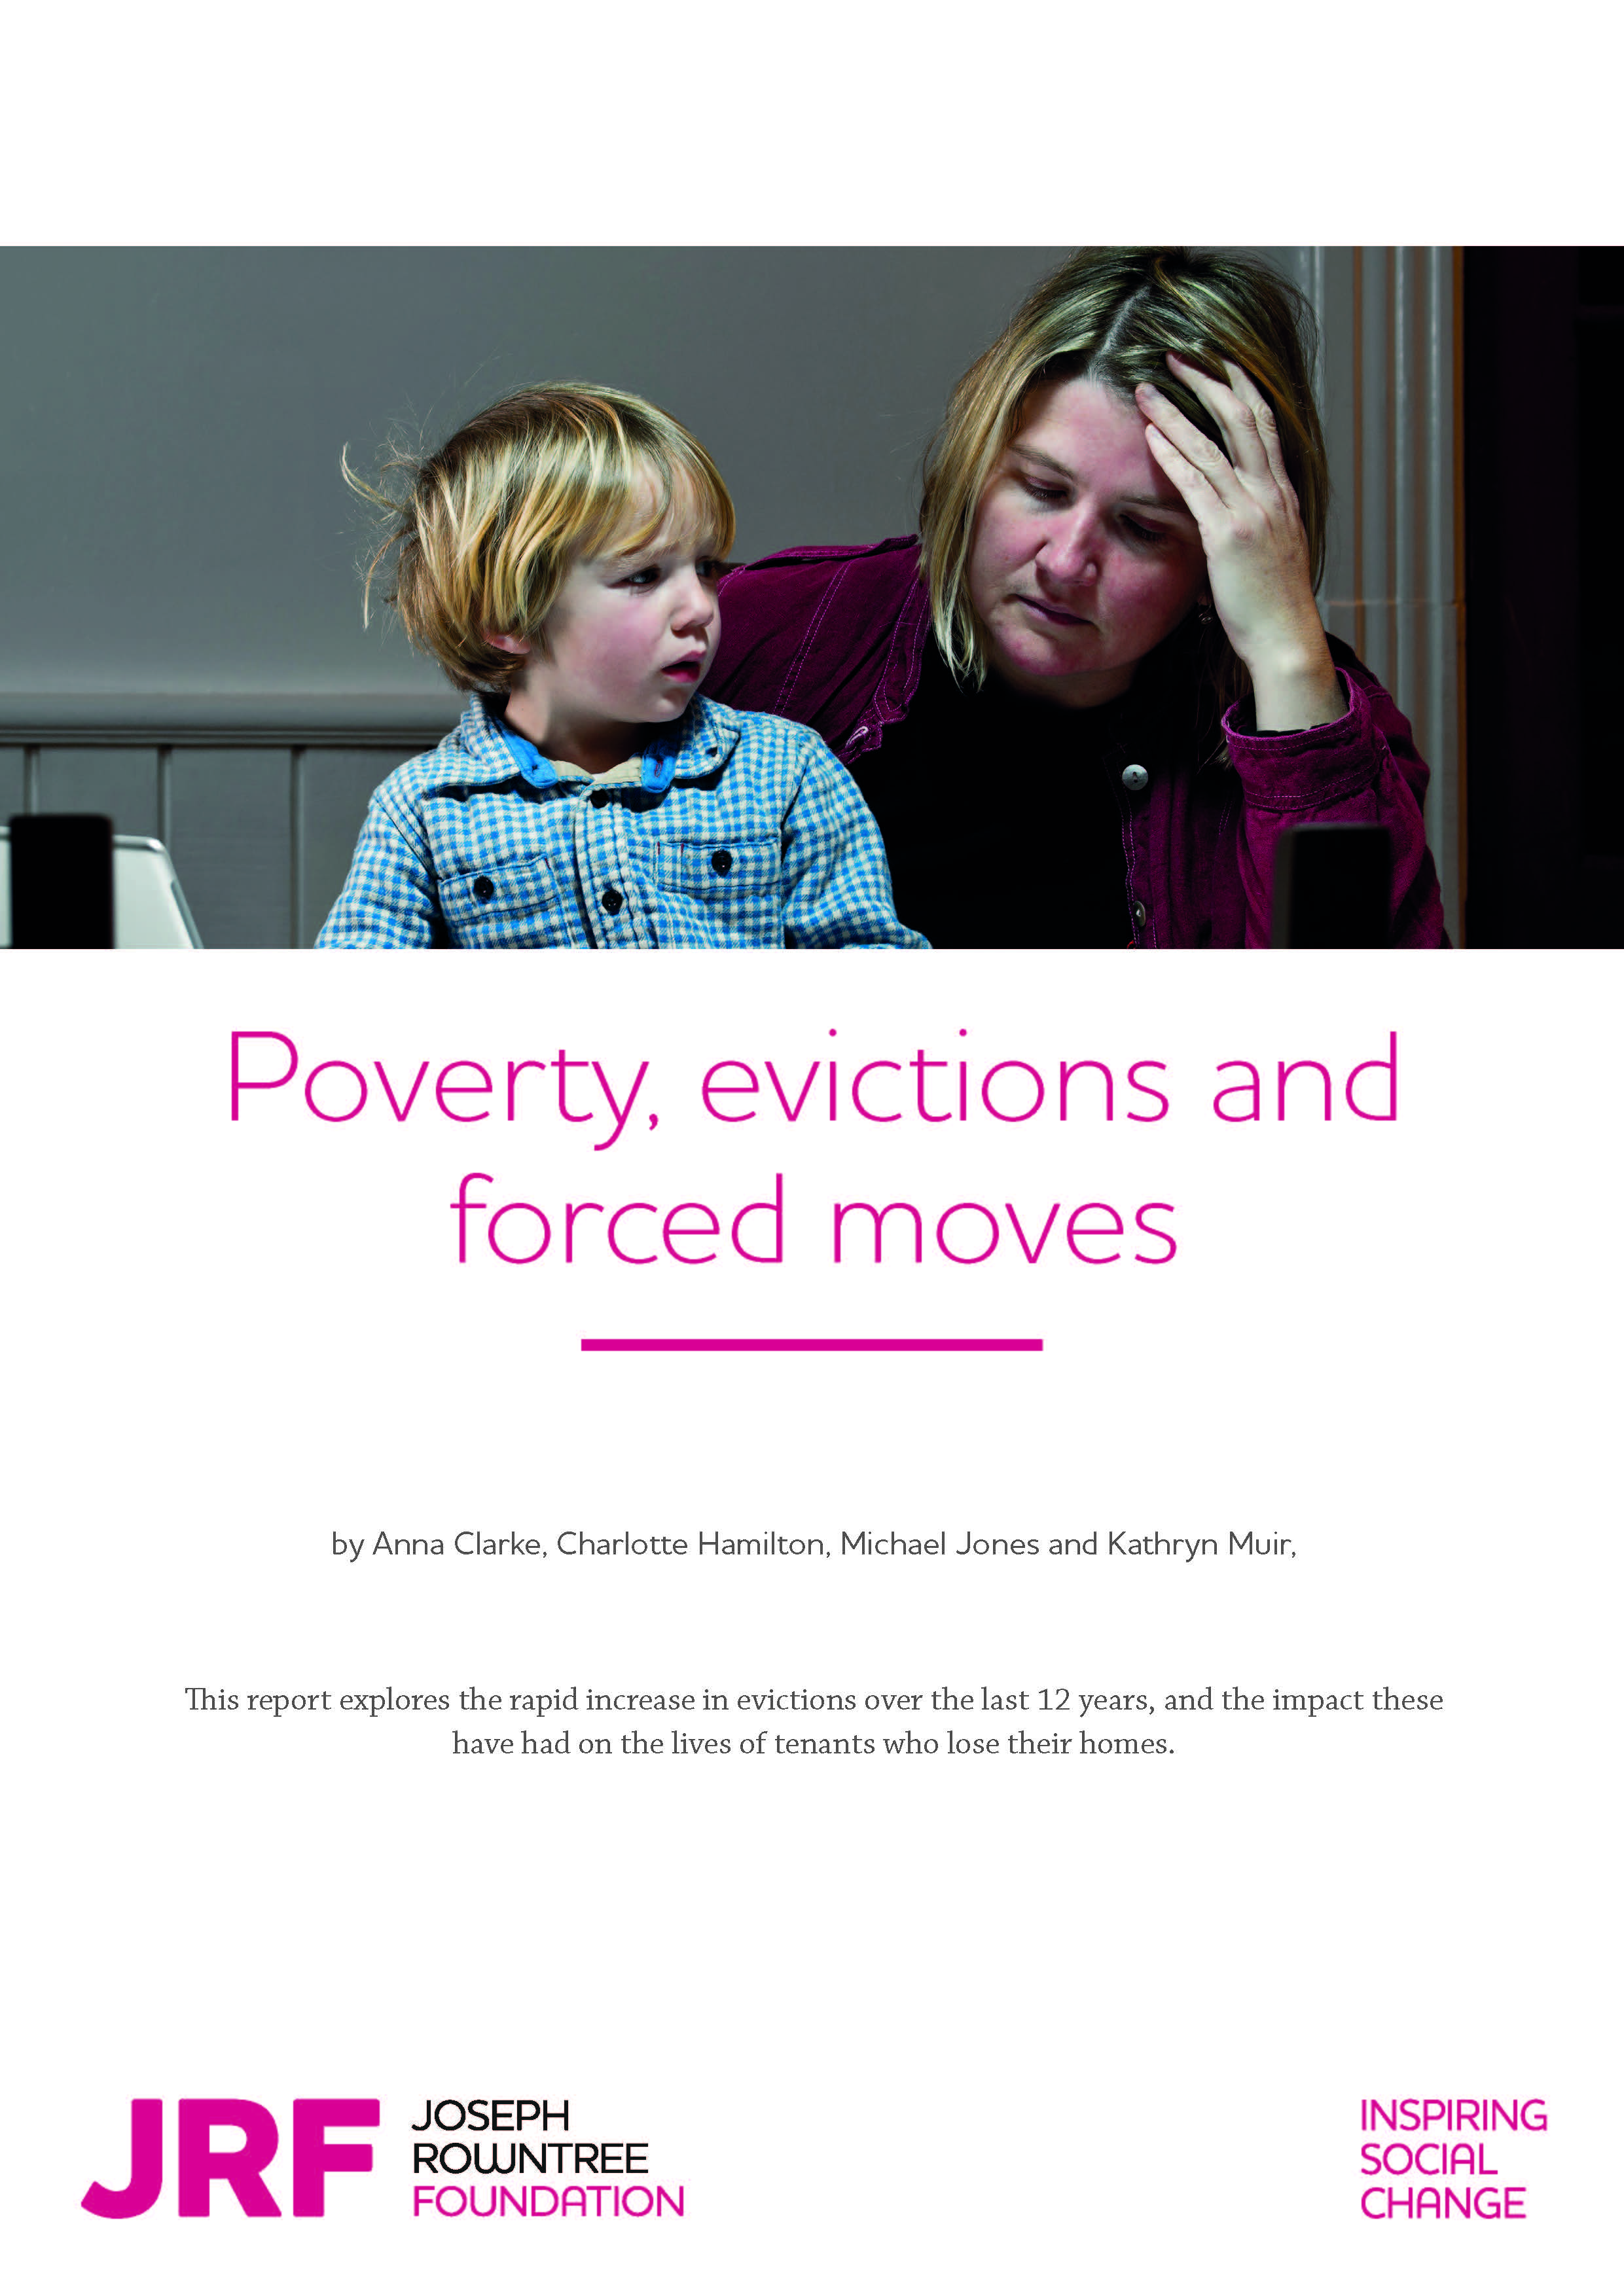 JRF Poverty Evictions and Forced Moves